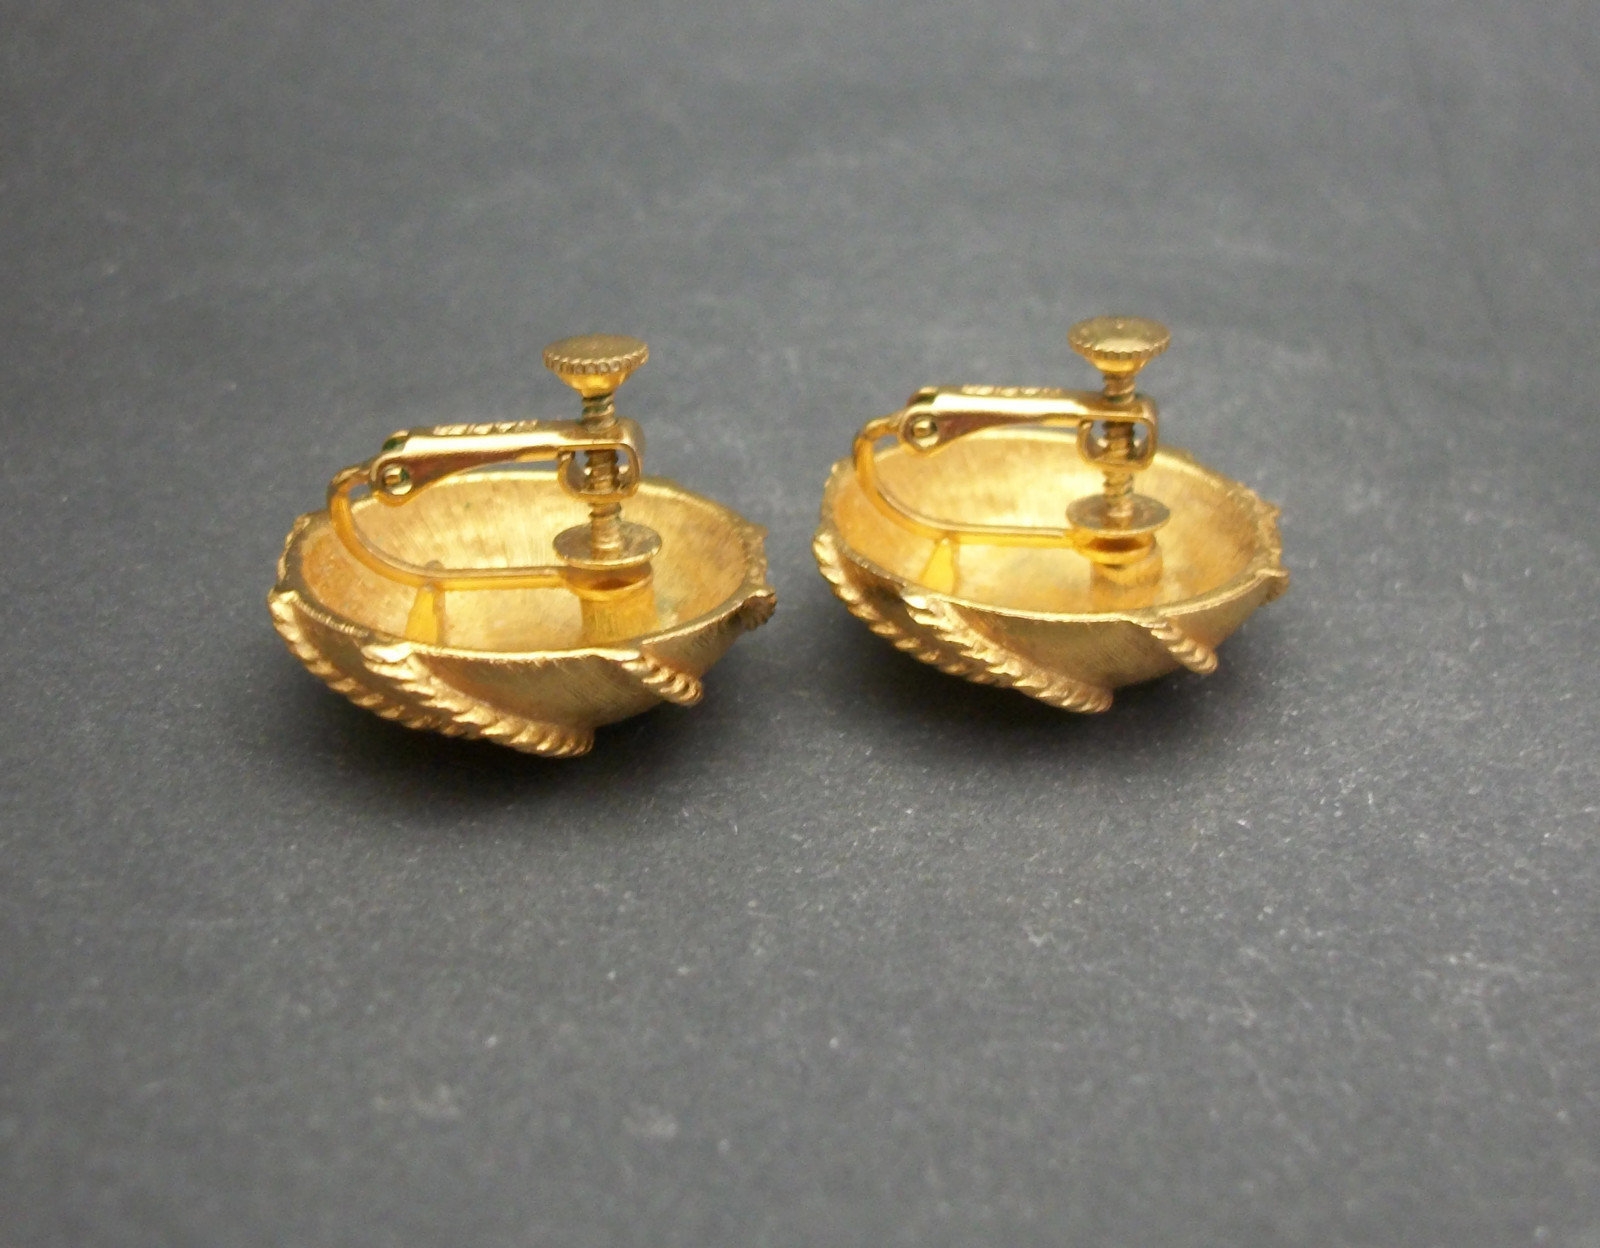 Vintage Napier Gold Clip on Earrings with Adjustable Screws 1 inch ...